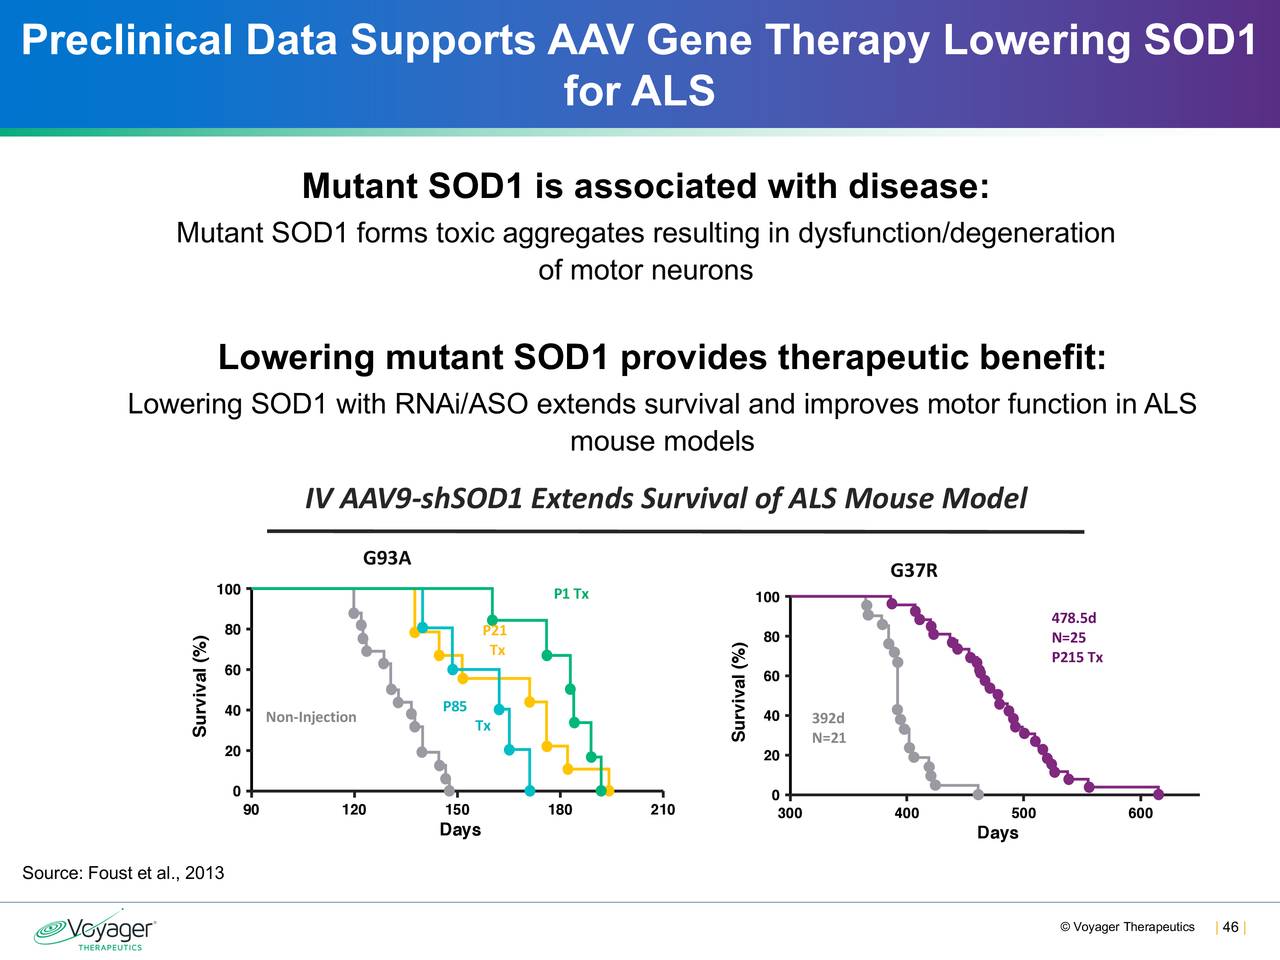 Preclinical Data Supports AAV Gene Therapy Lowering SOD1